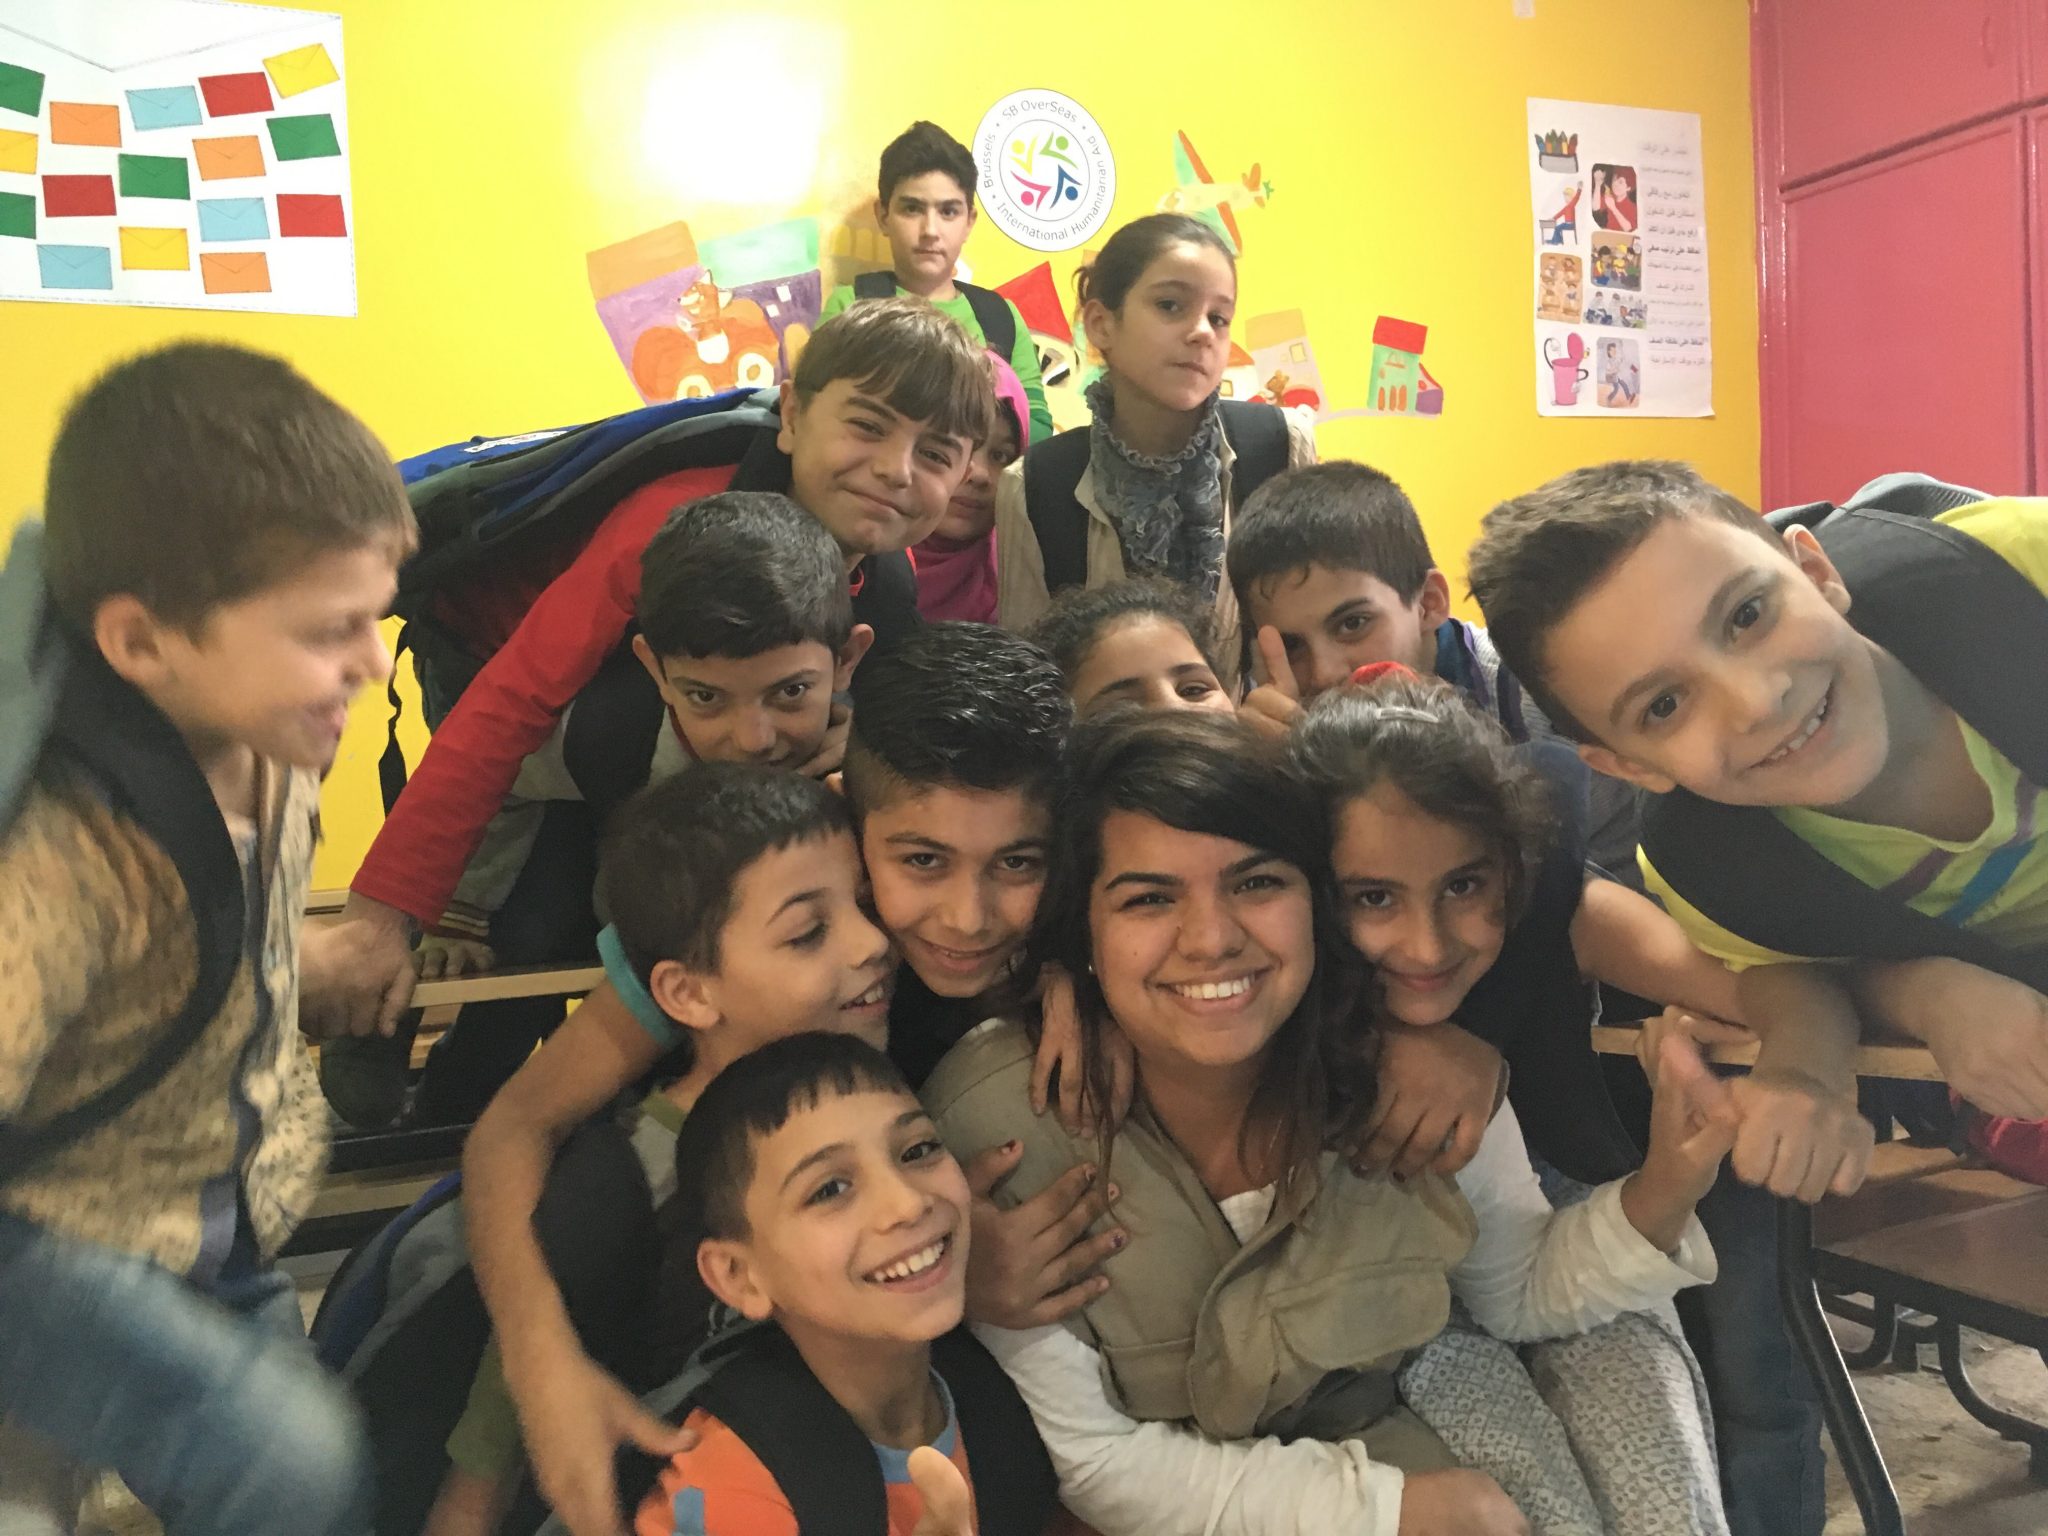 My experience with the children of Bukra Ahla